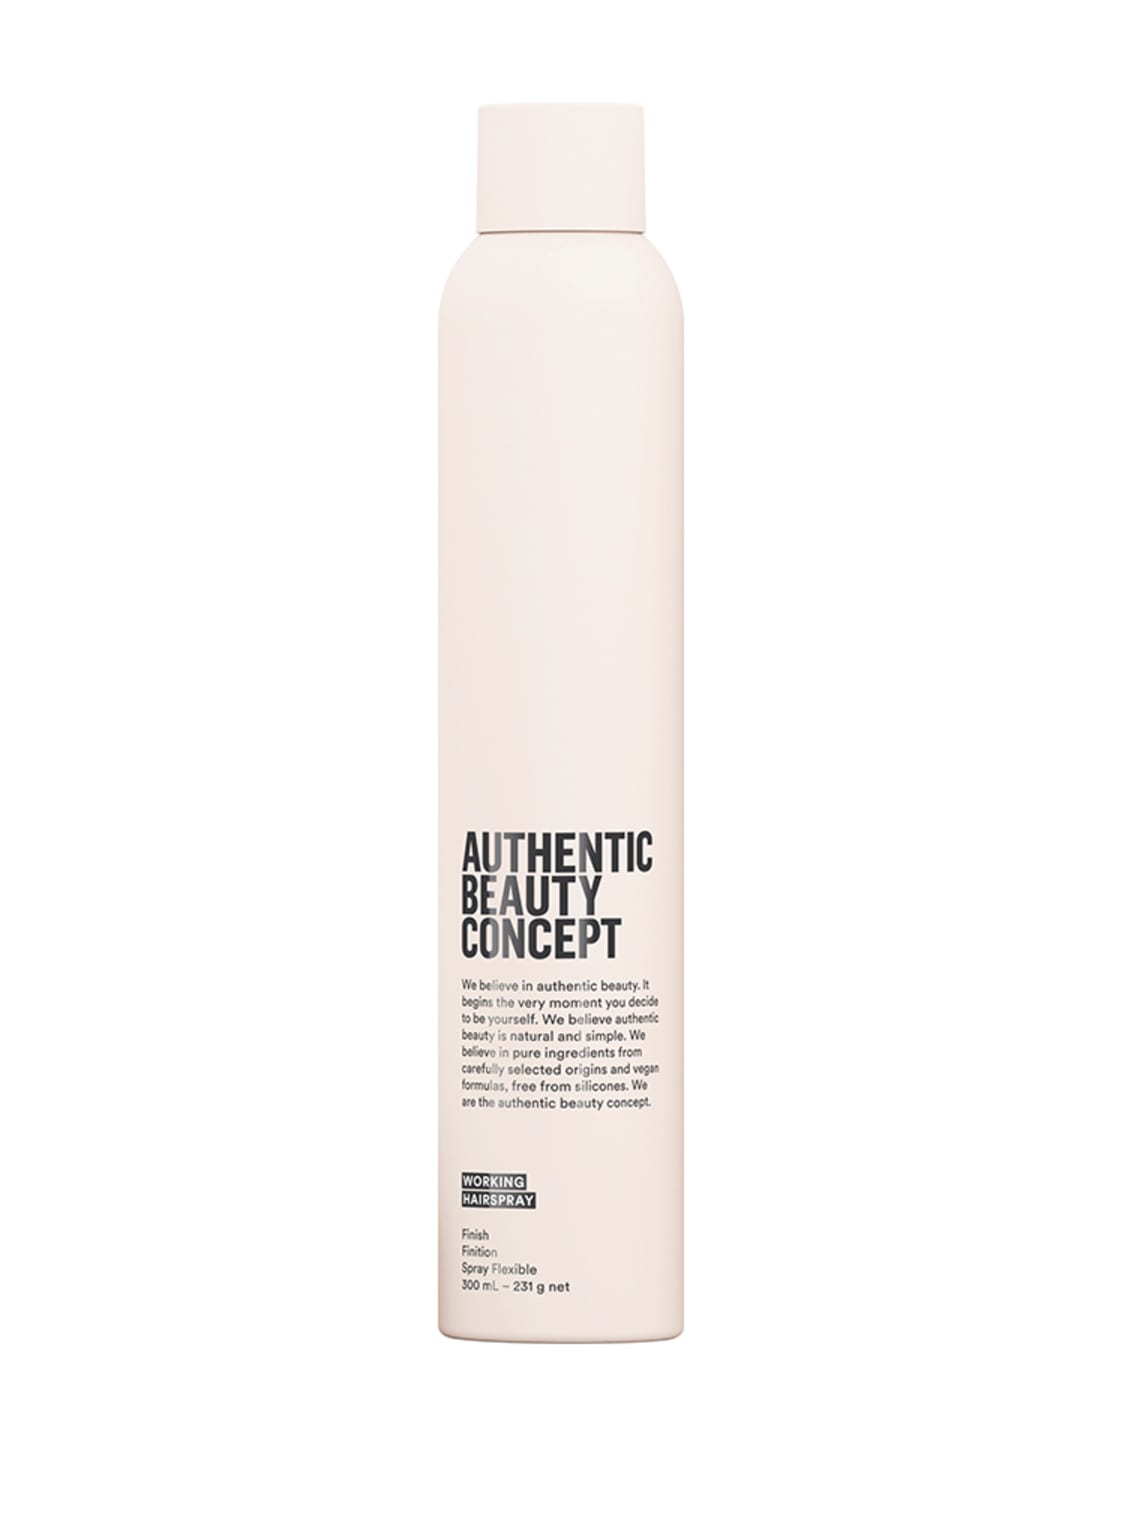 Authentic Beauty Concept Working Hairspray Haarspray 300 ml von AUTHENTIC BEAUTY CONCEPT